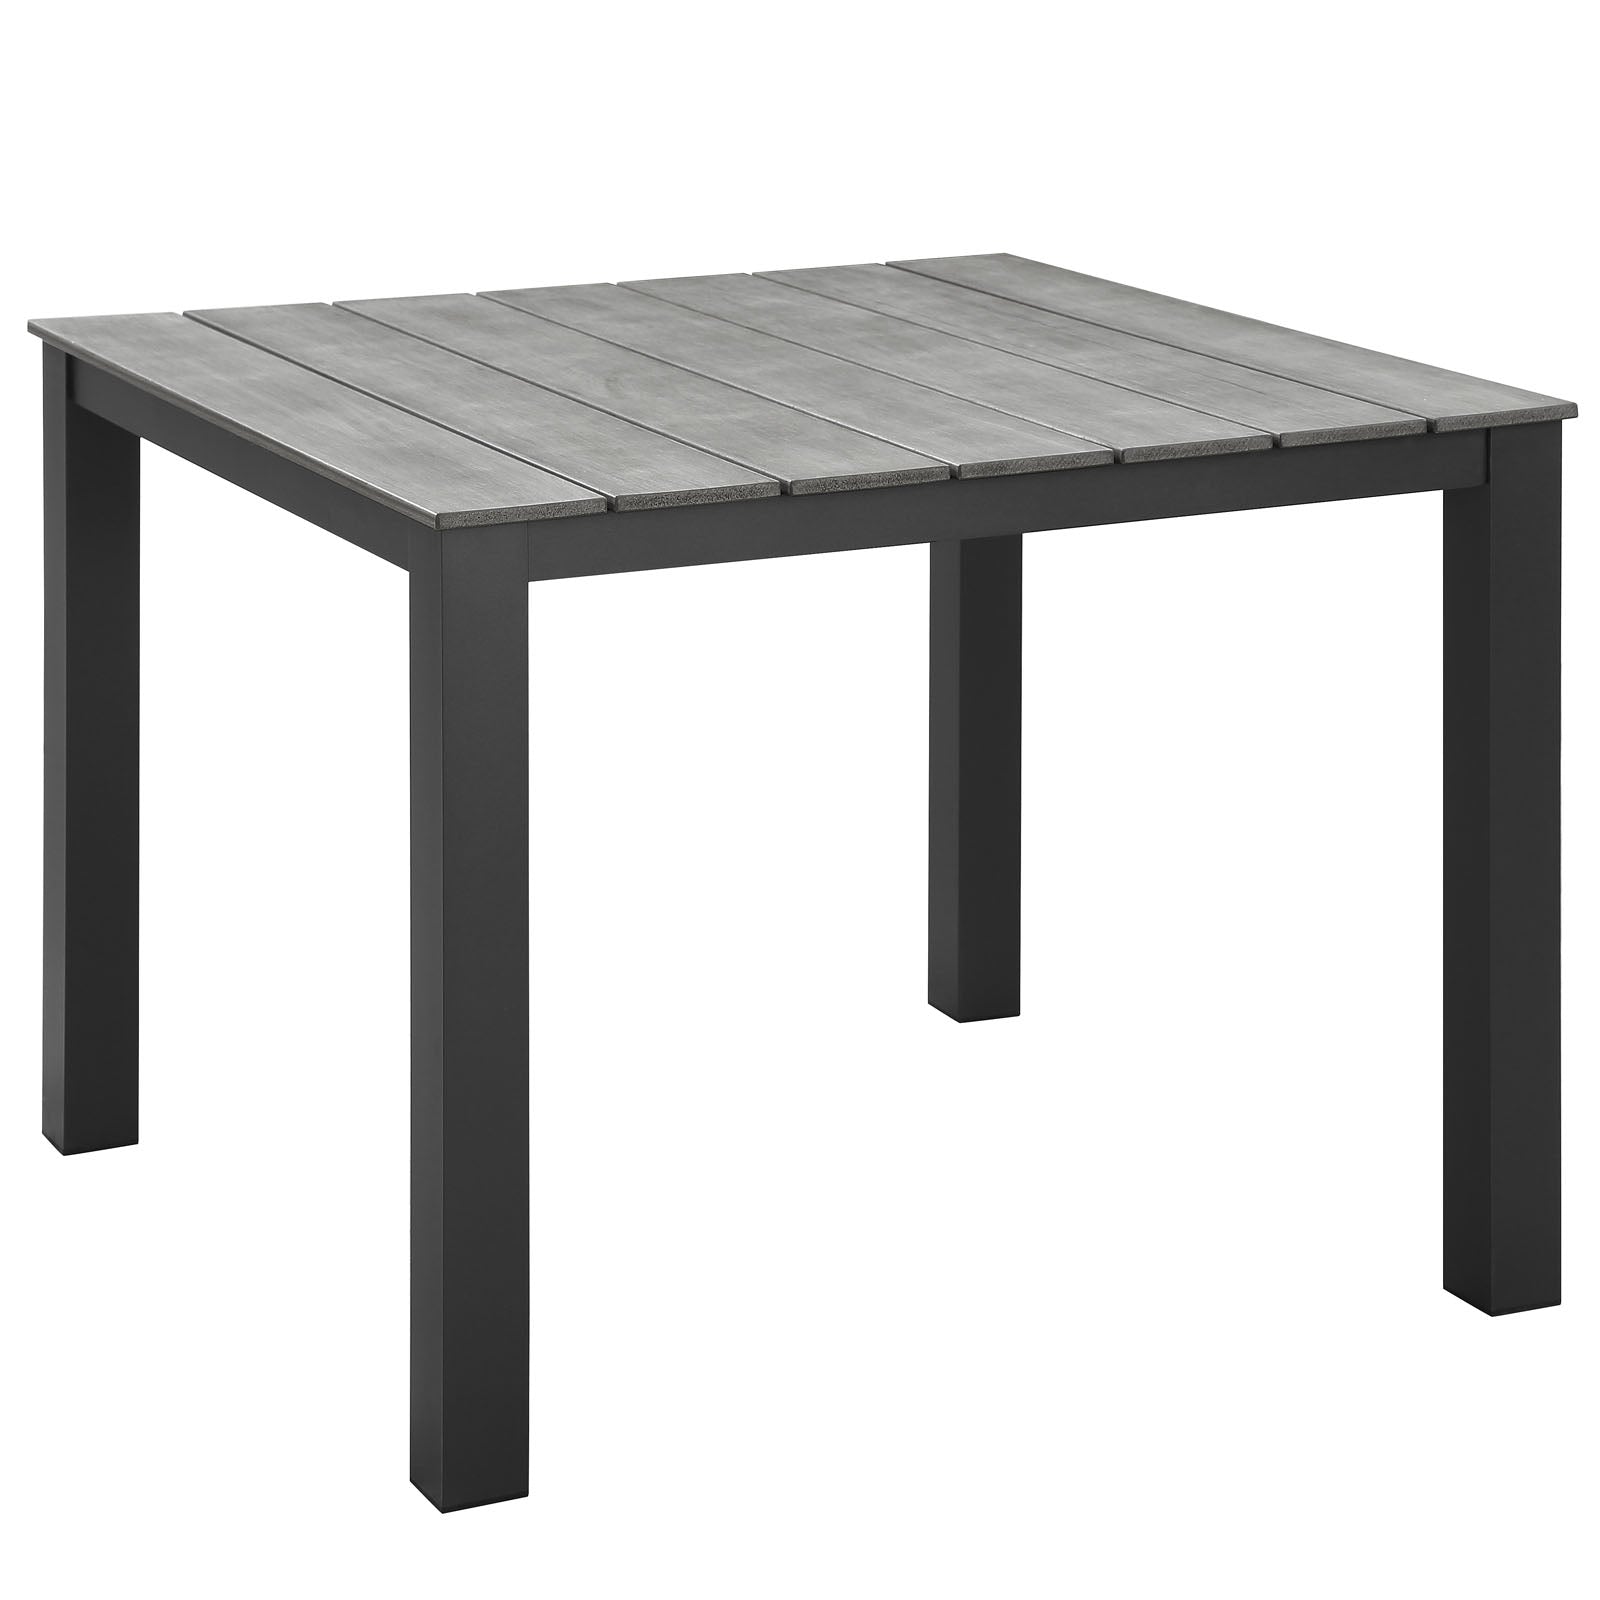 Maine 40" Outdoor Patio Dining Table - East Shore Modern Home Furnishings